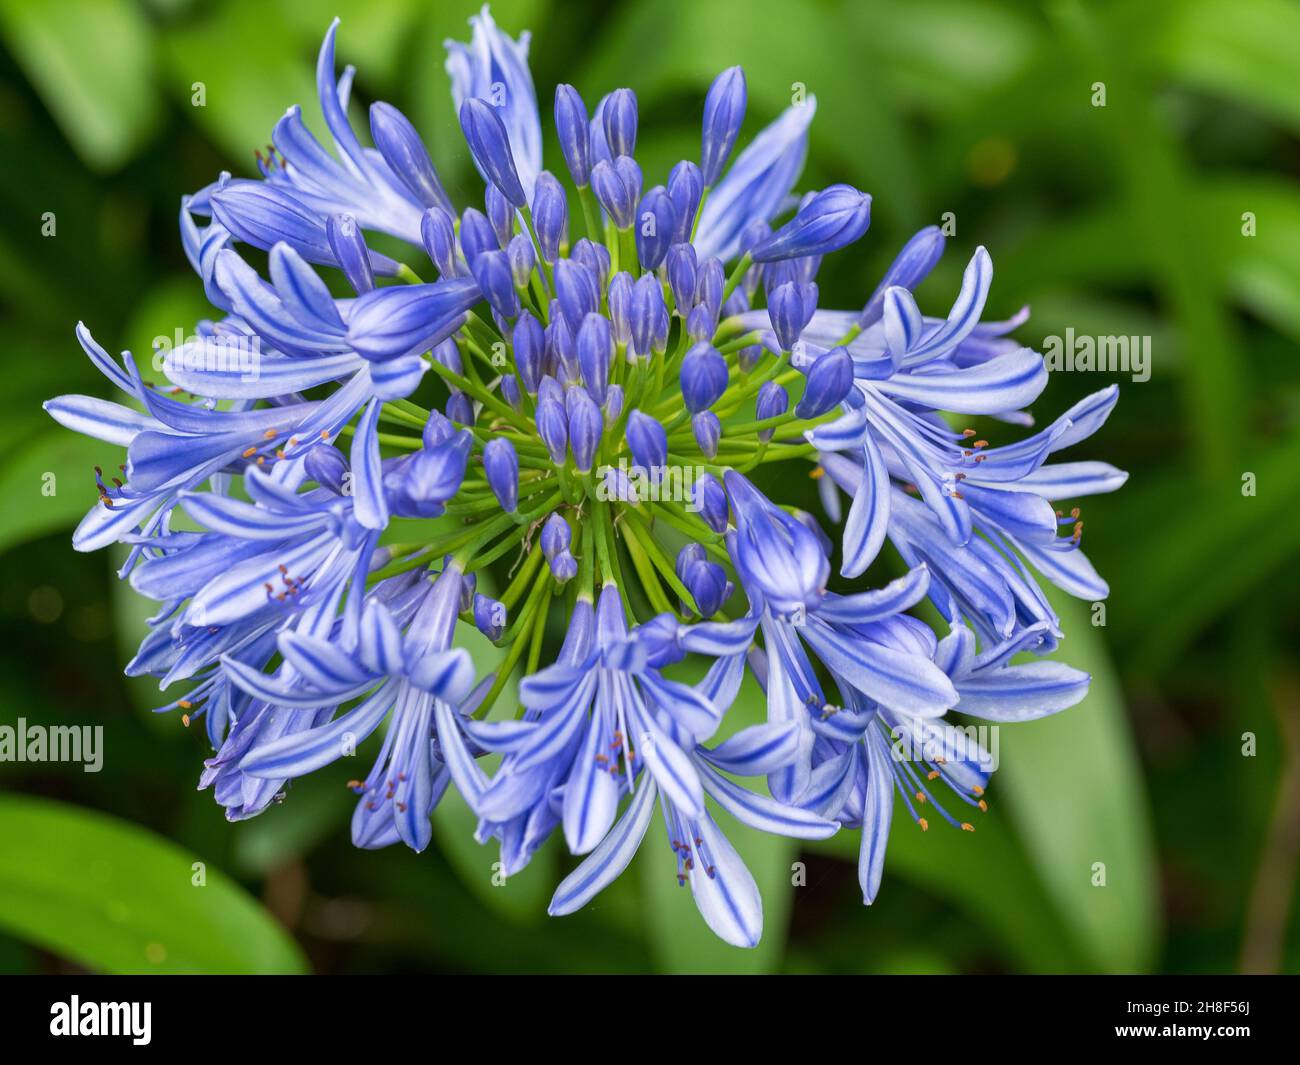 Flowers. Purple Blue Agapanthus plant  and green foliage in bloom. Flowering near the end of spring. Stock Photo